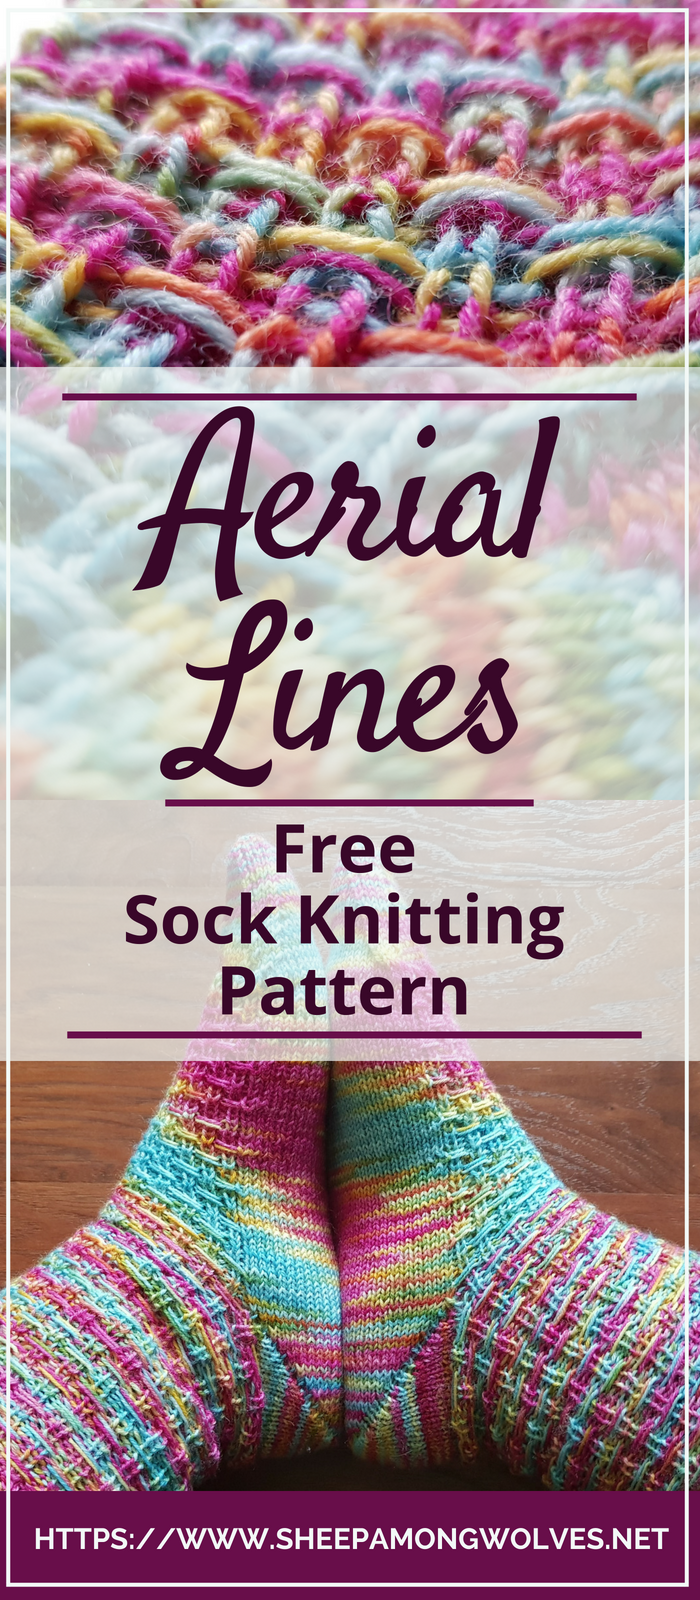 Aerial Lines is my new sock pattern - and it's free! Perfect for those beautiful variegated yarns in your stash. Give it a try and tell me how you liked it!